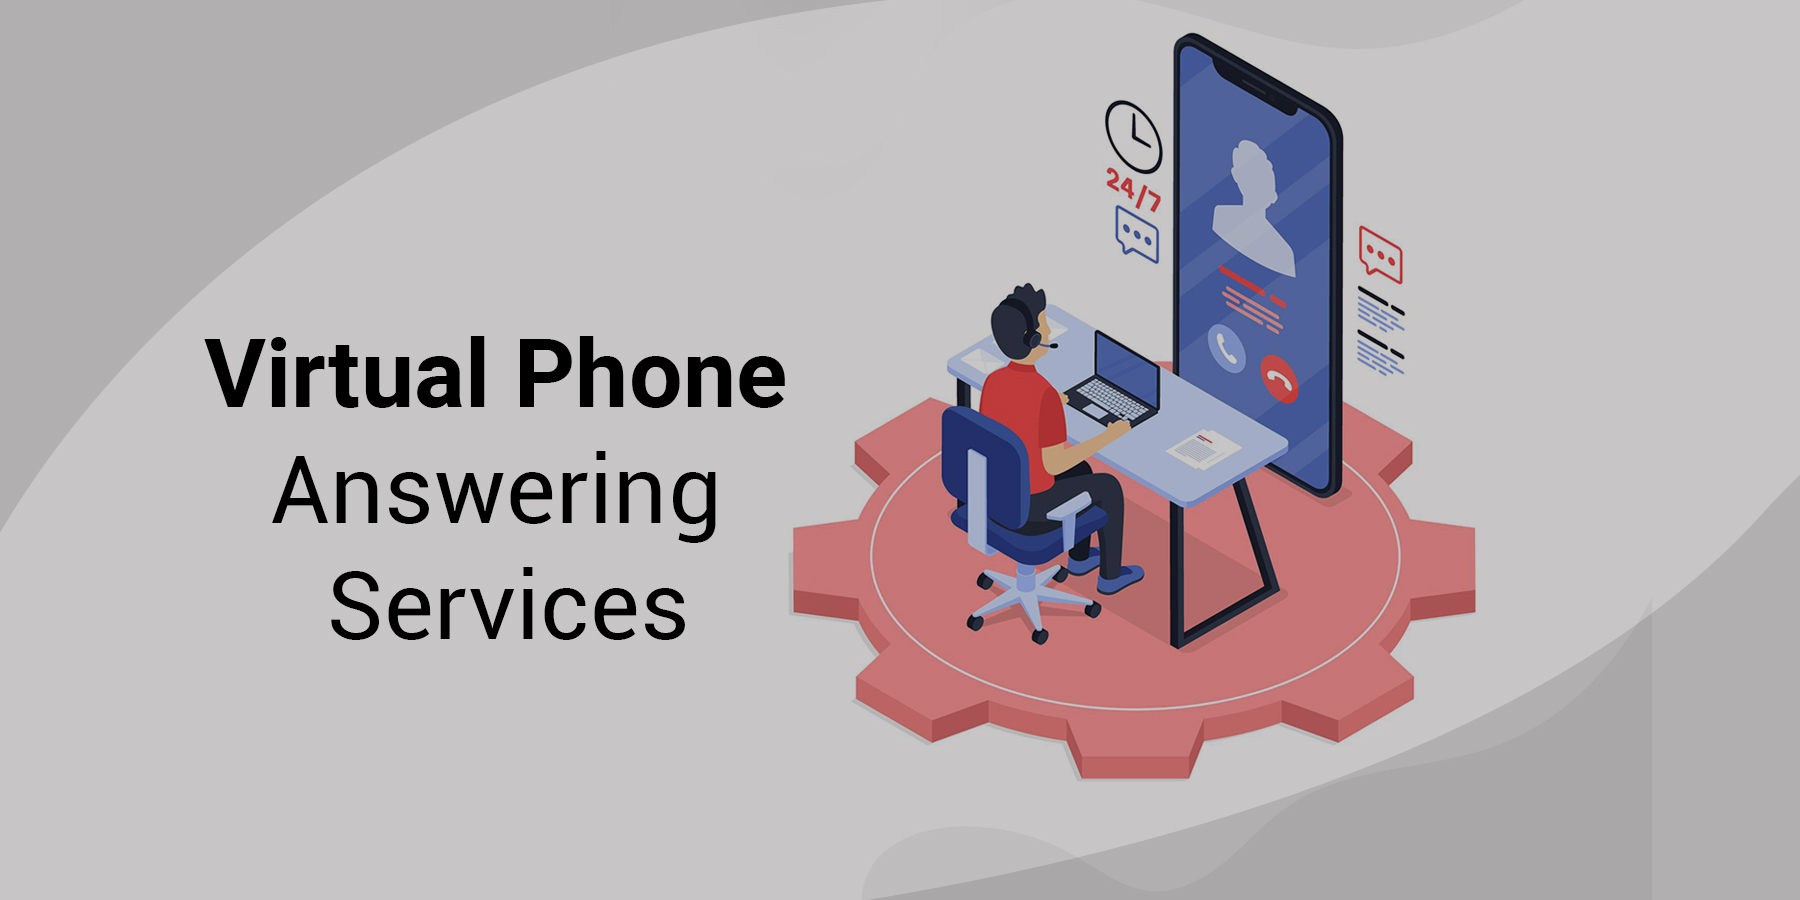 Virtual Phone Answering Services